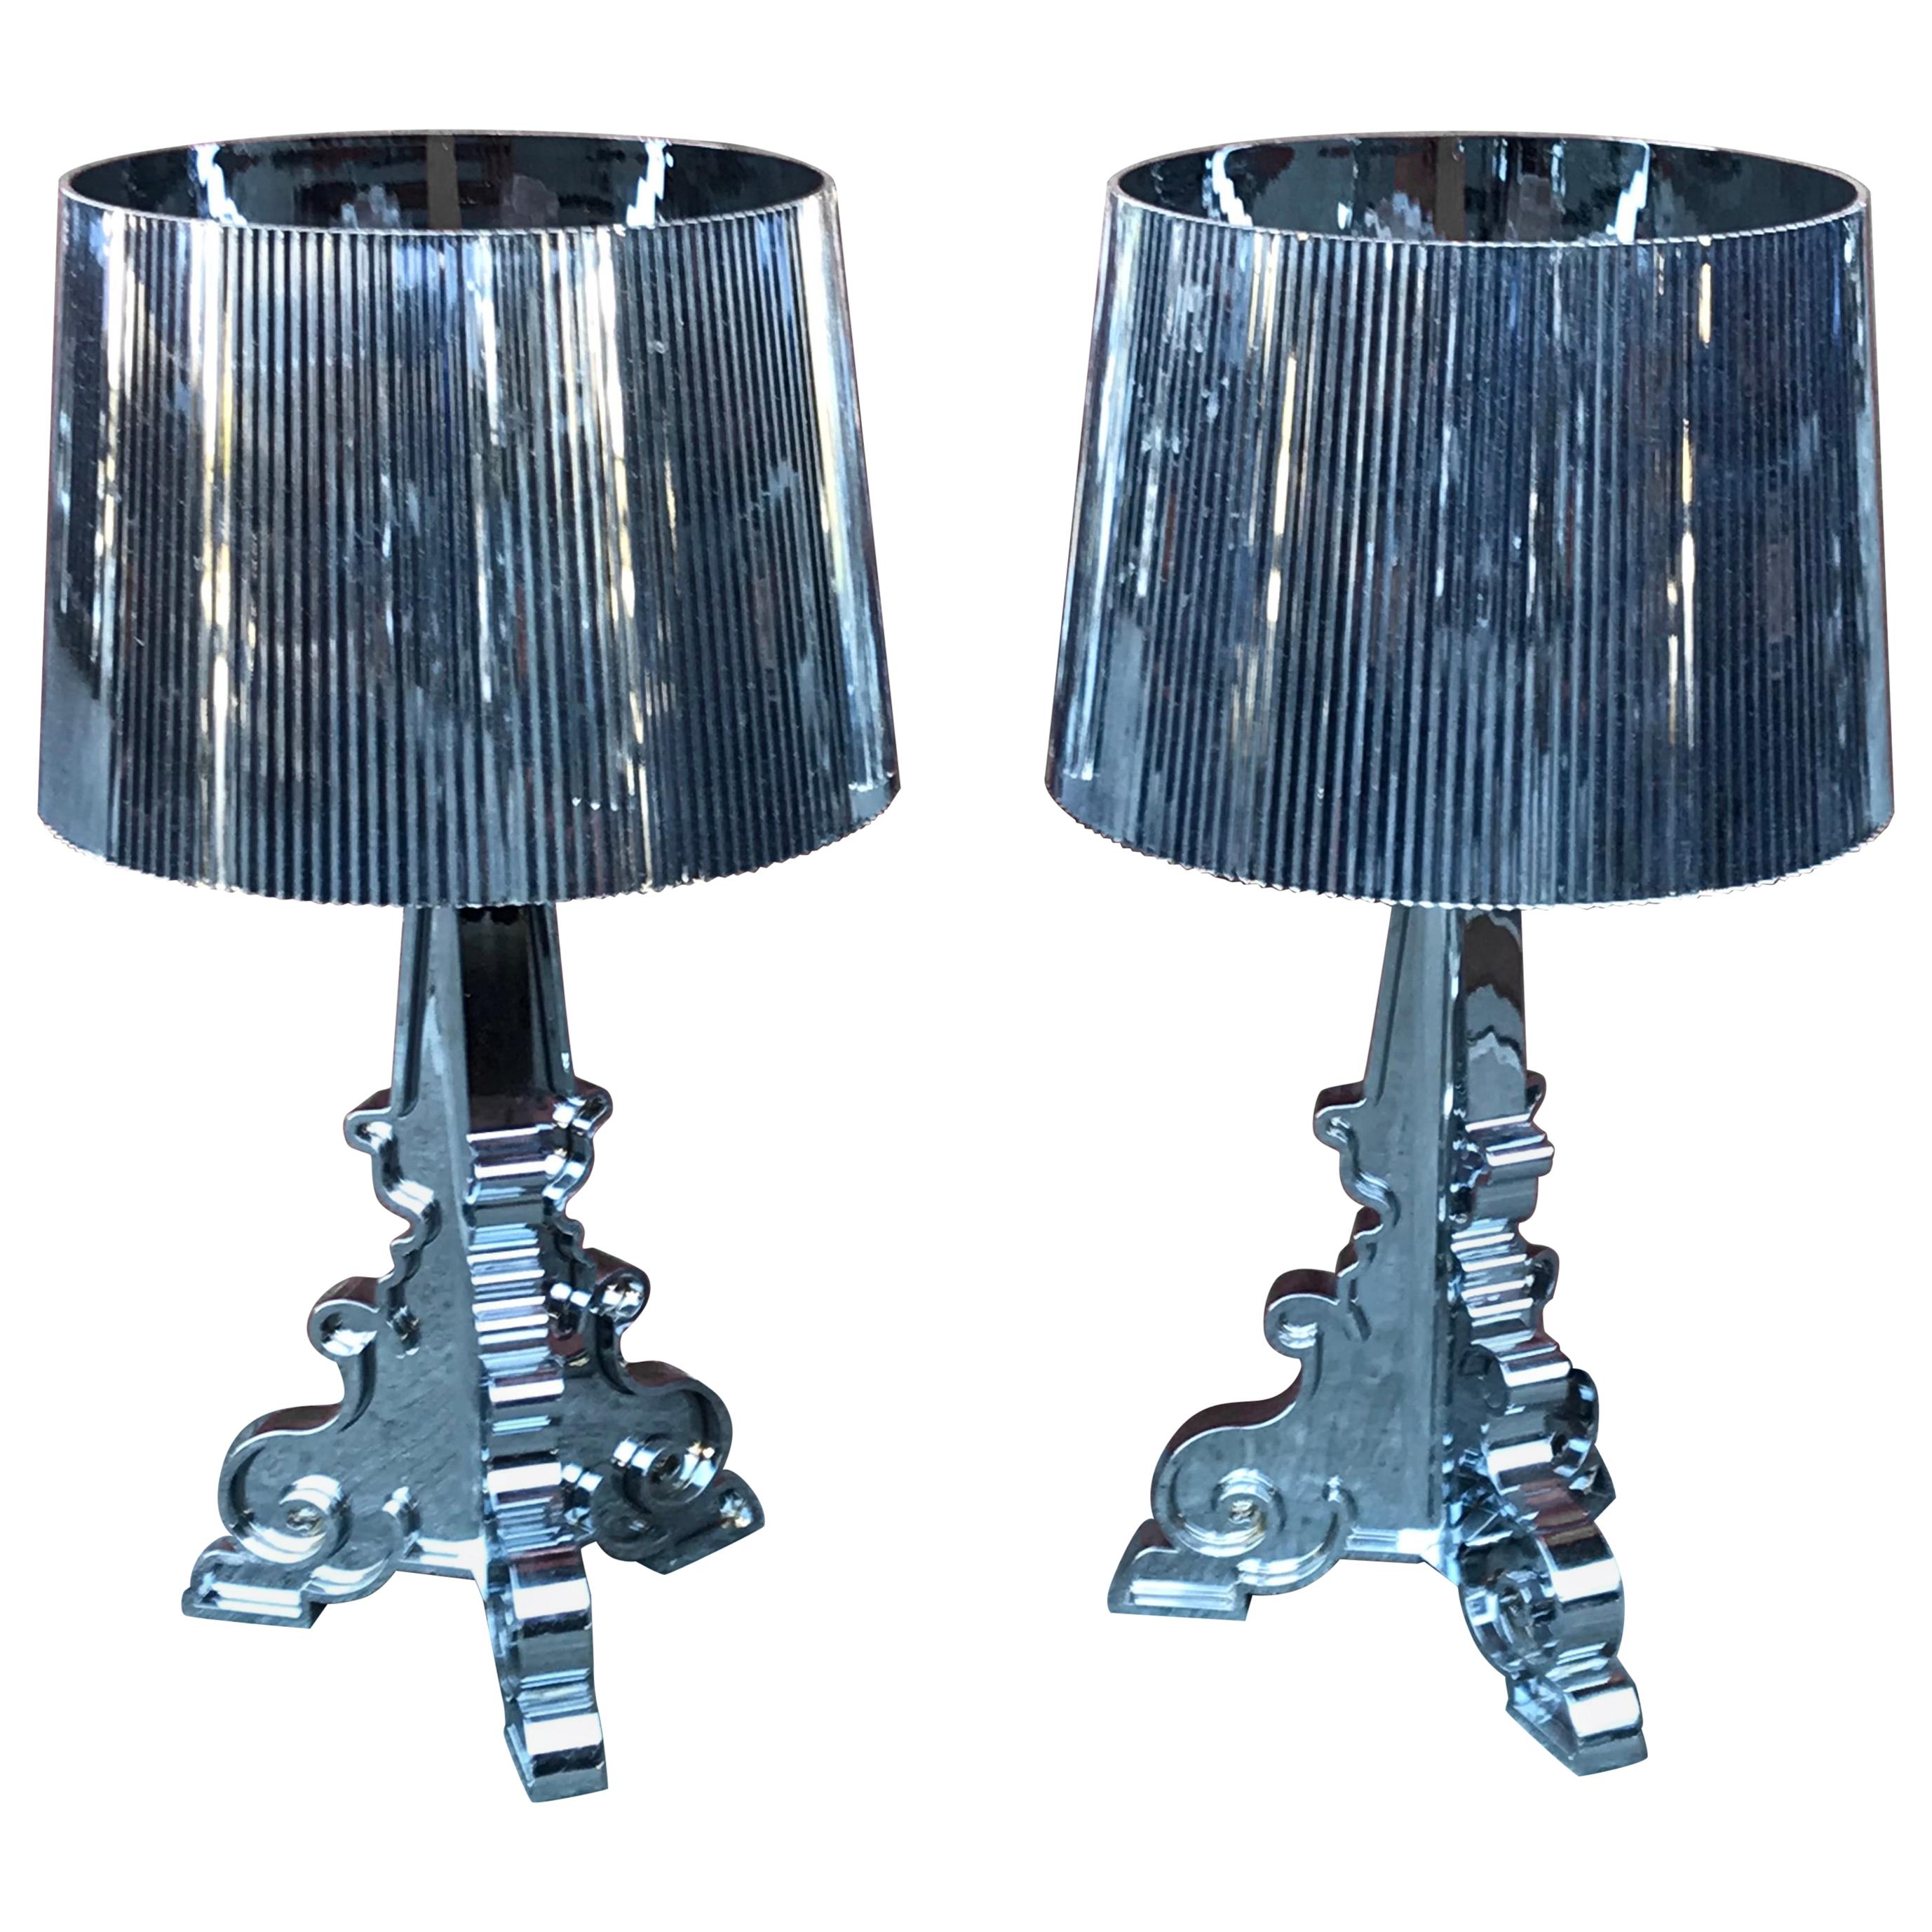 Pair of Silver Table Lamps by Ferruccio Laviani for Kartell, Late 20th Century